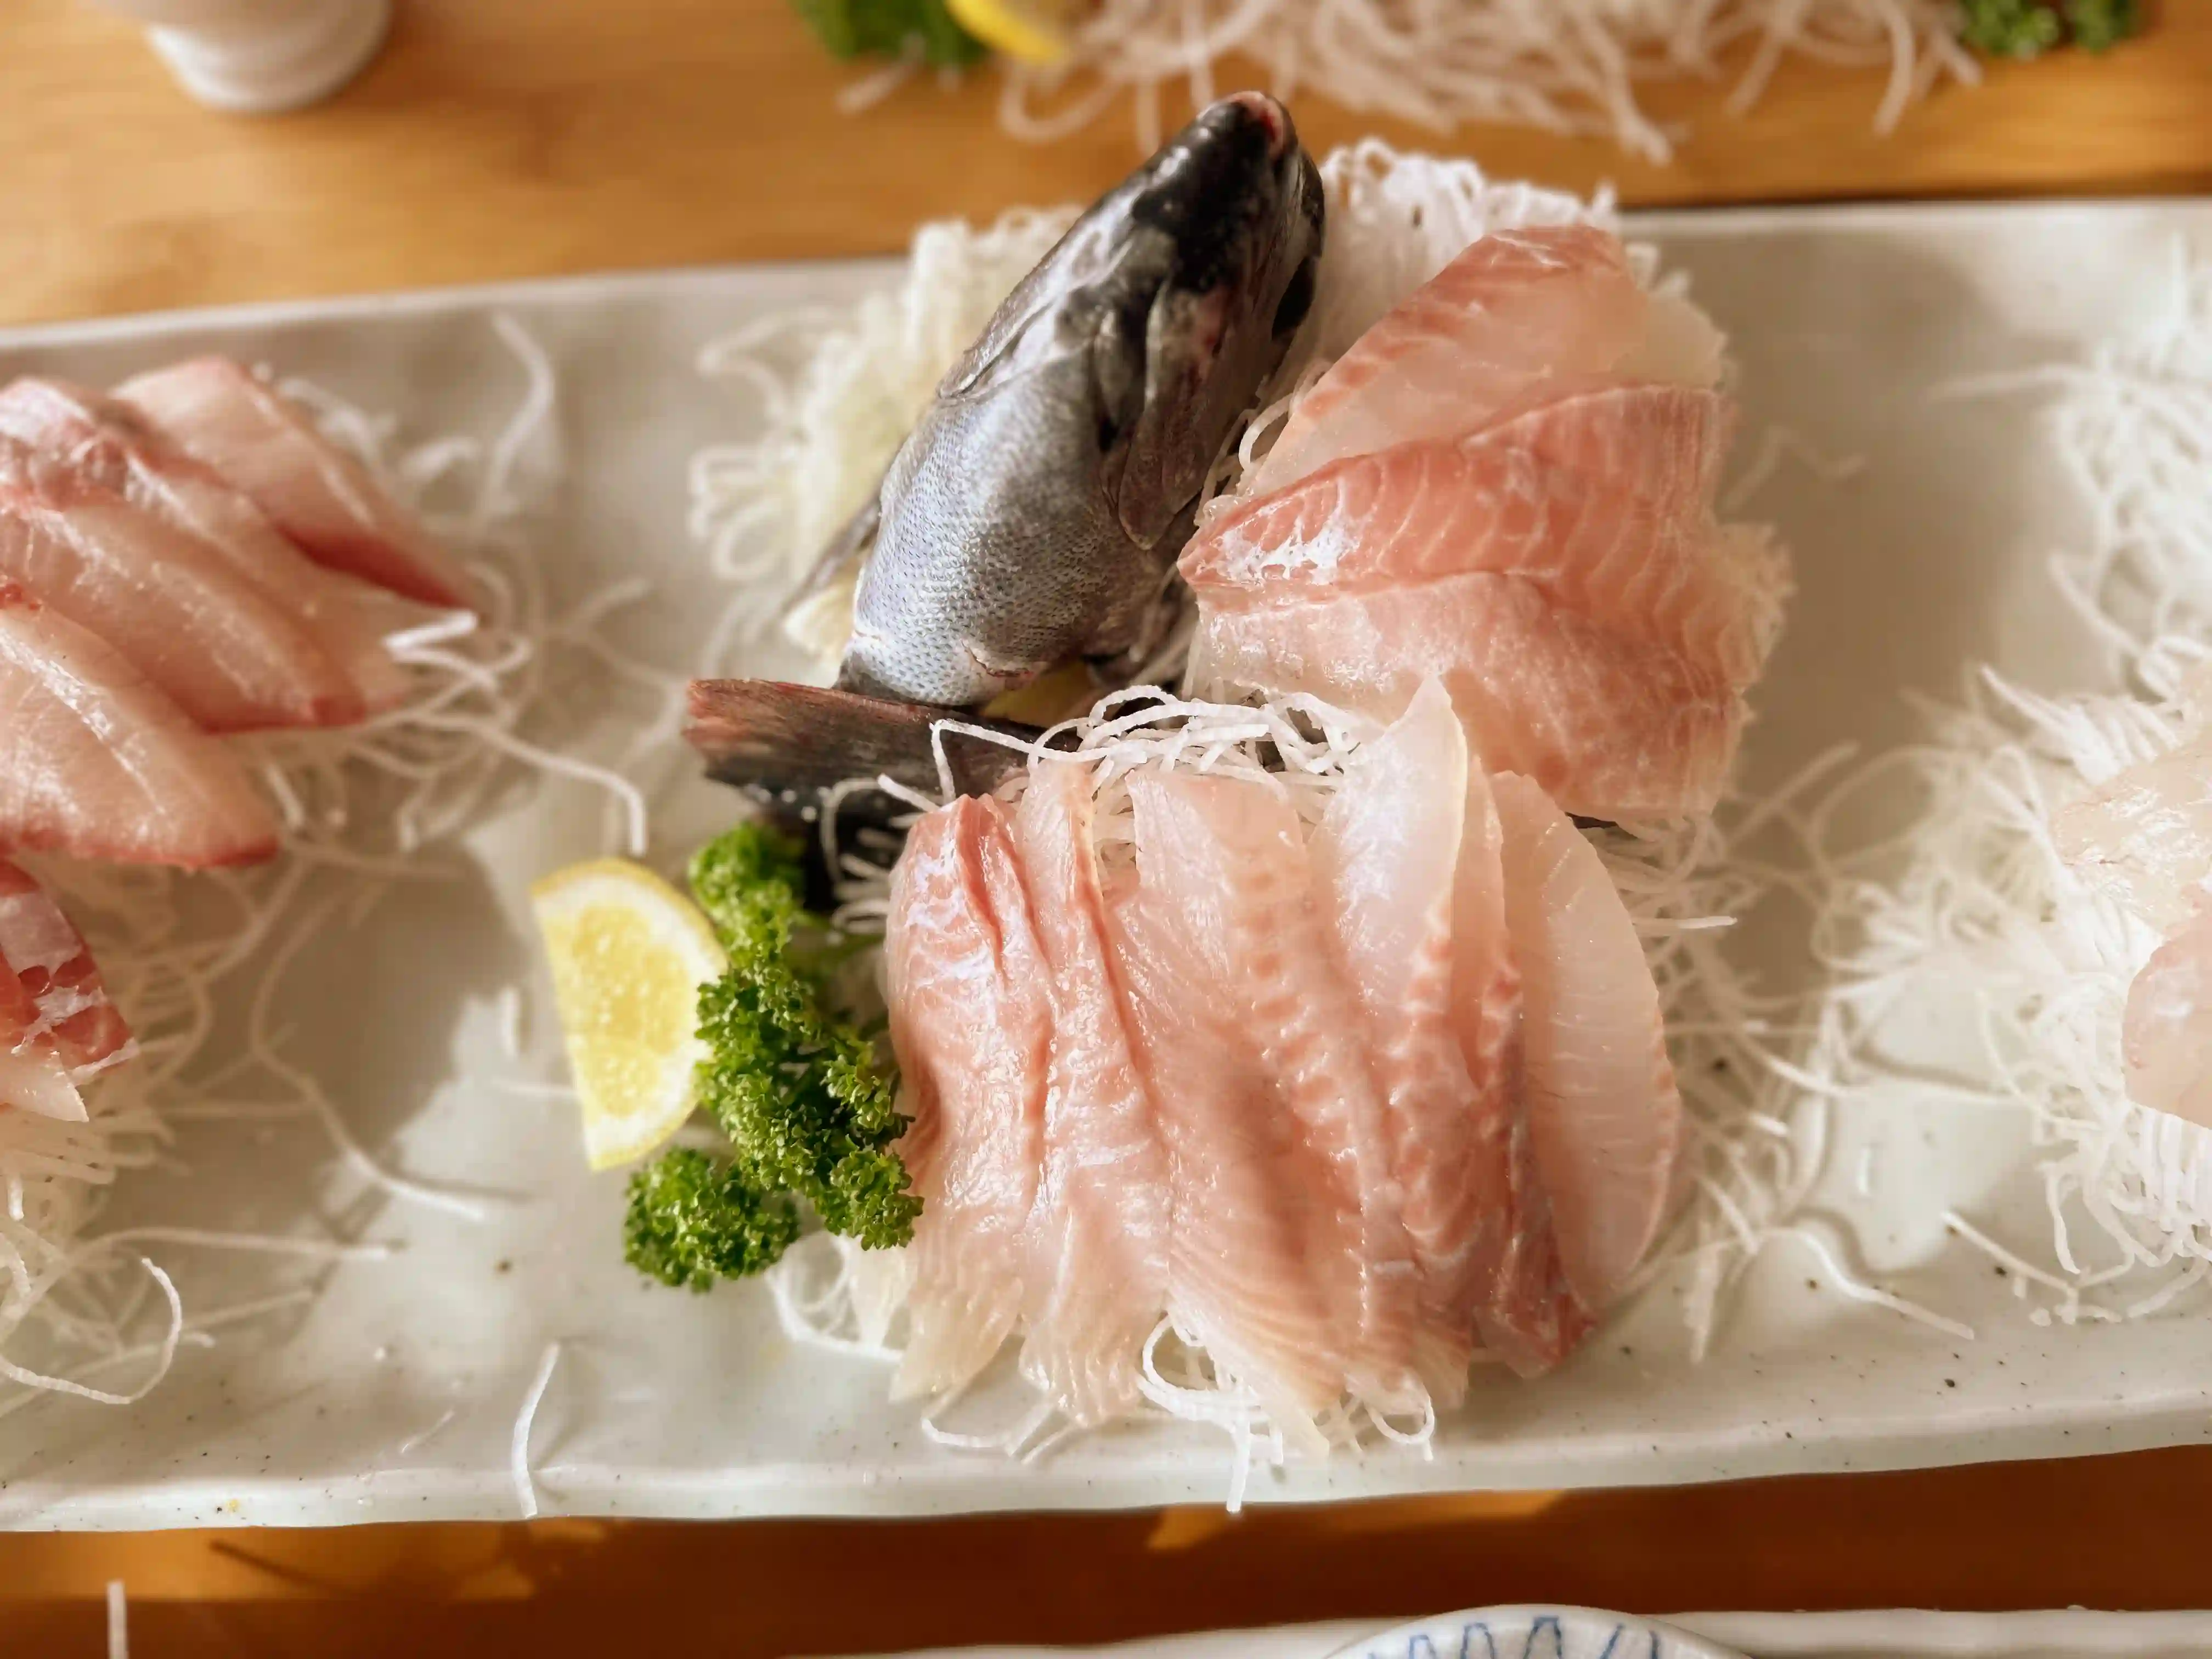 The main course features natural live sashimi